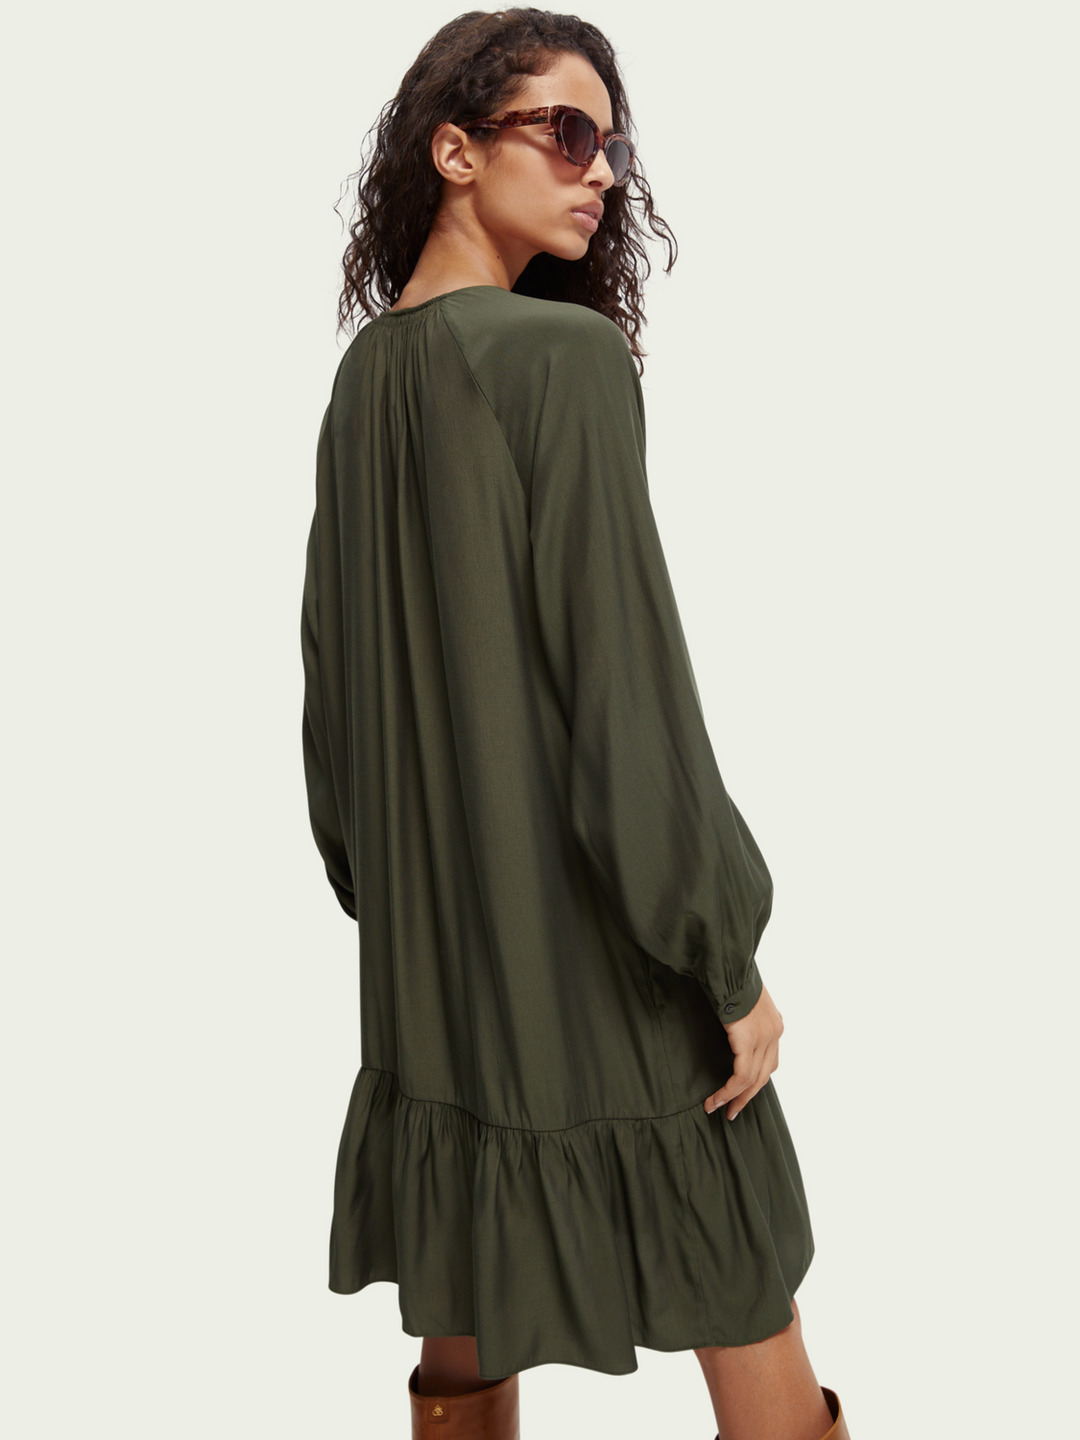 Easy-Fit Long-Sleeved Dress